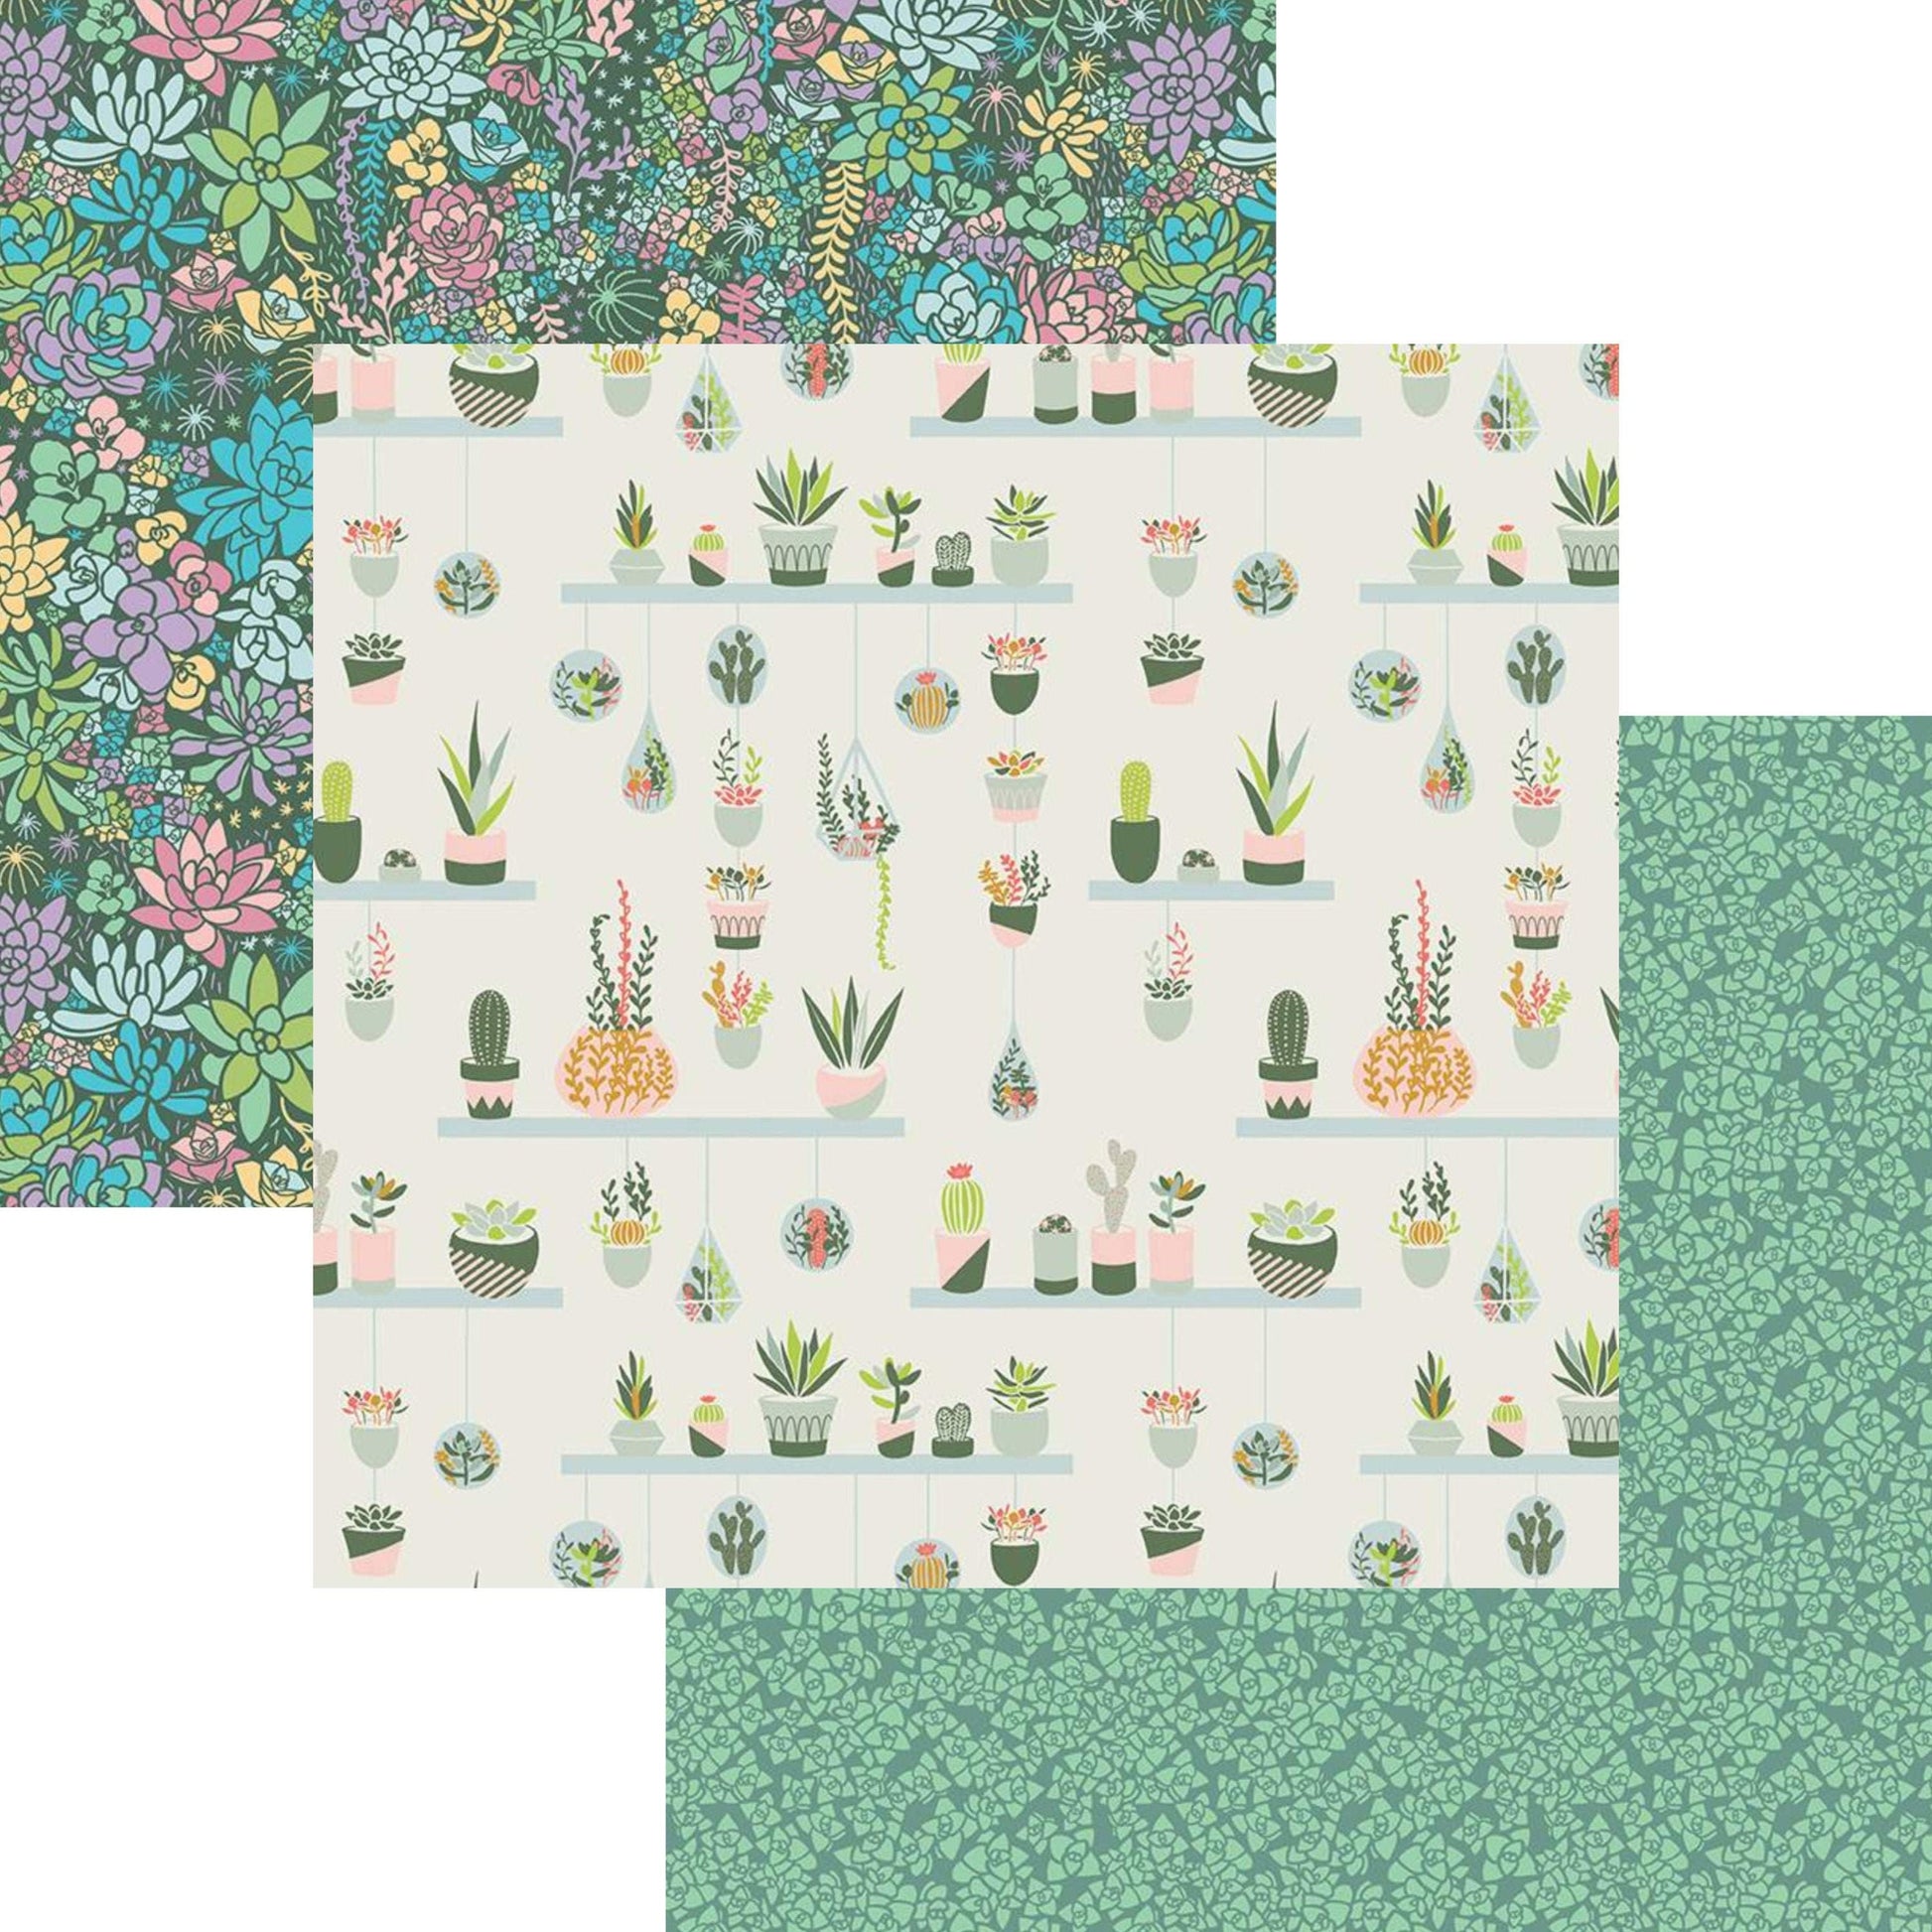 LAMINATED cotton fabric - Succulent-Arid Oasis Off-white (sold continuous by the half yard) Food Safe Fabric, BPA free